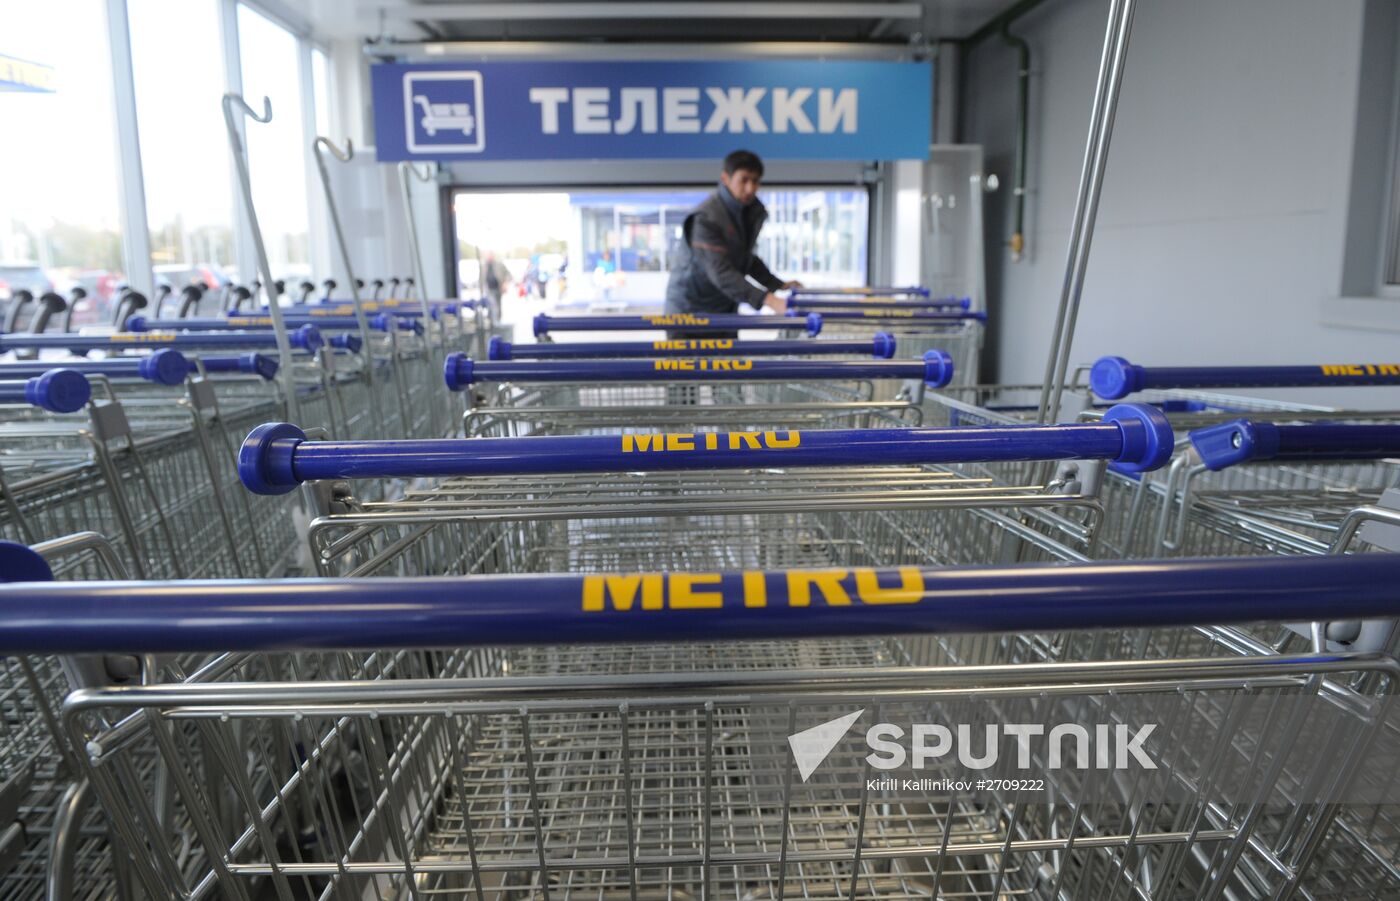 METRO Cash & Carry logistics and shopping center opens in Lobnya